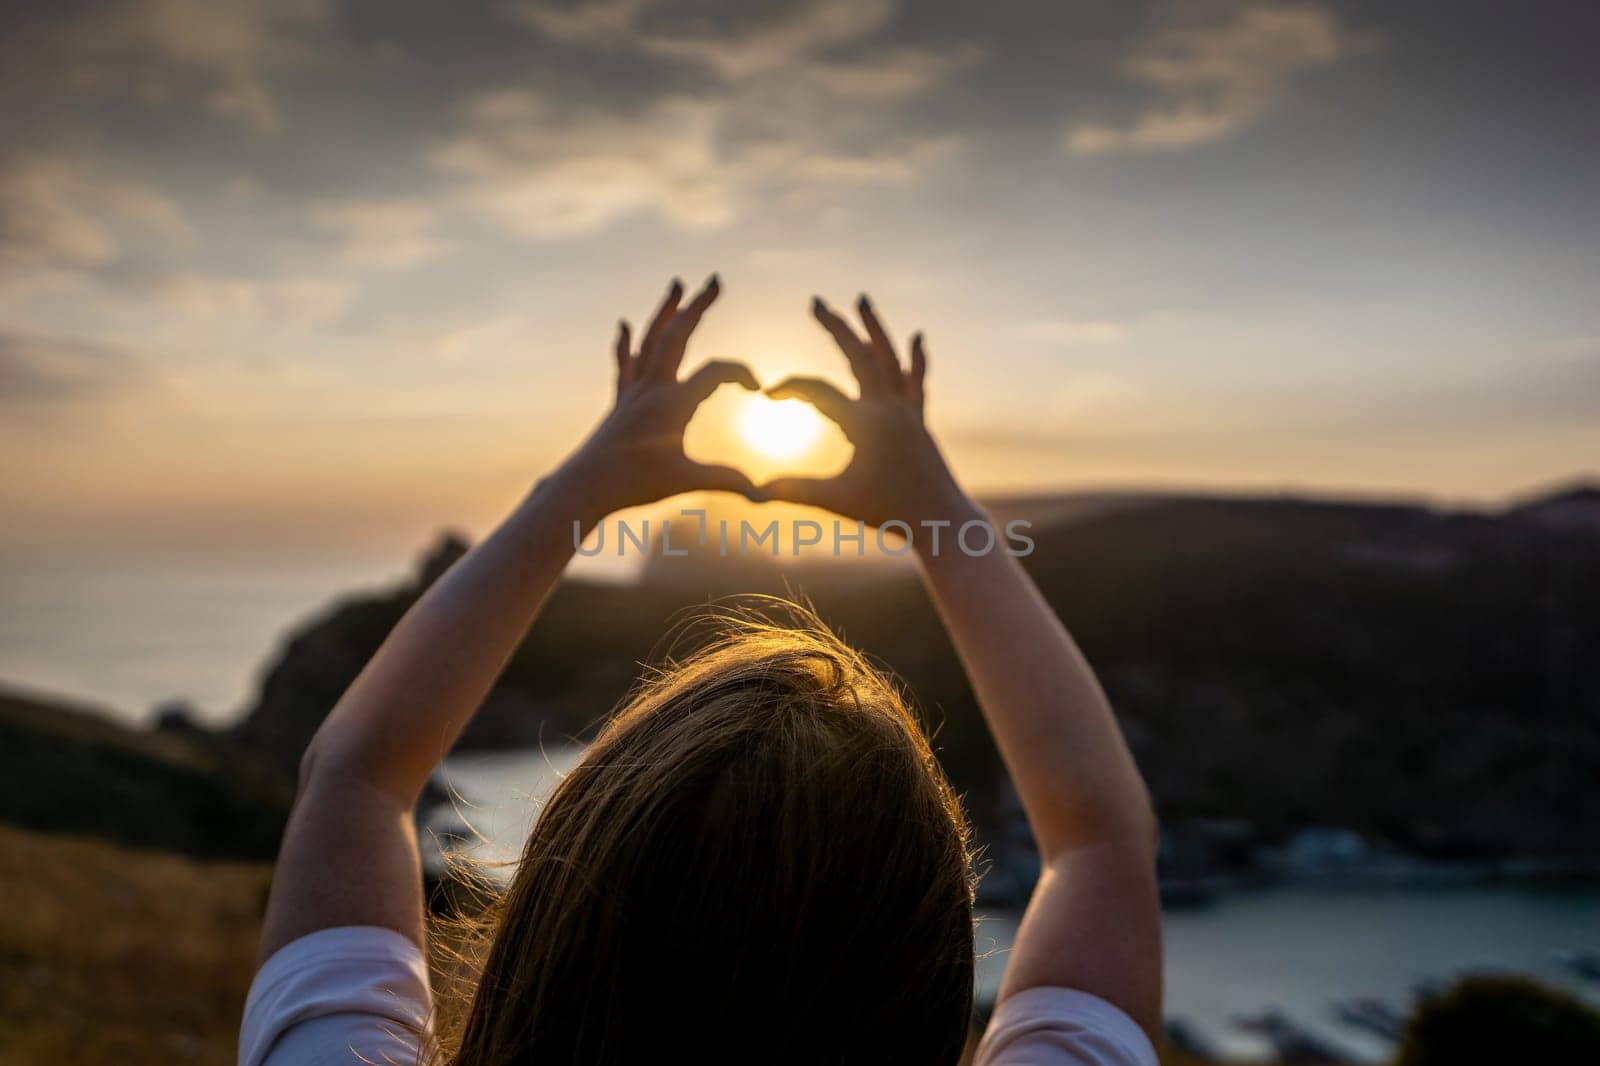 Happy woman on mountain peak, she makes heart shape with hands. Mountain, overlooking sea at sunset. Depicting love shape amidst scenic natural setting. by Matiunina